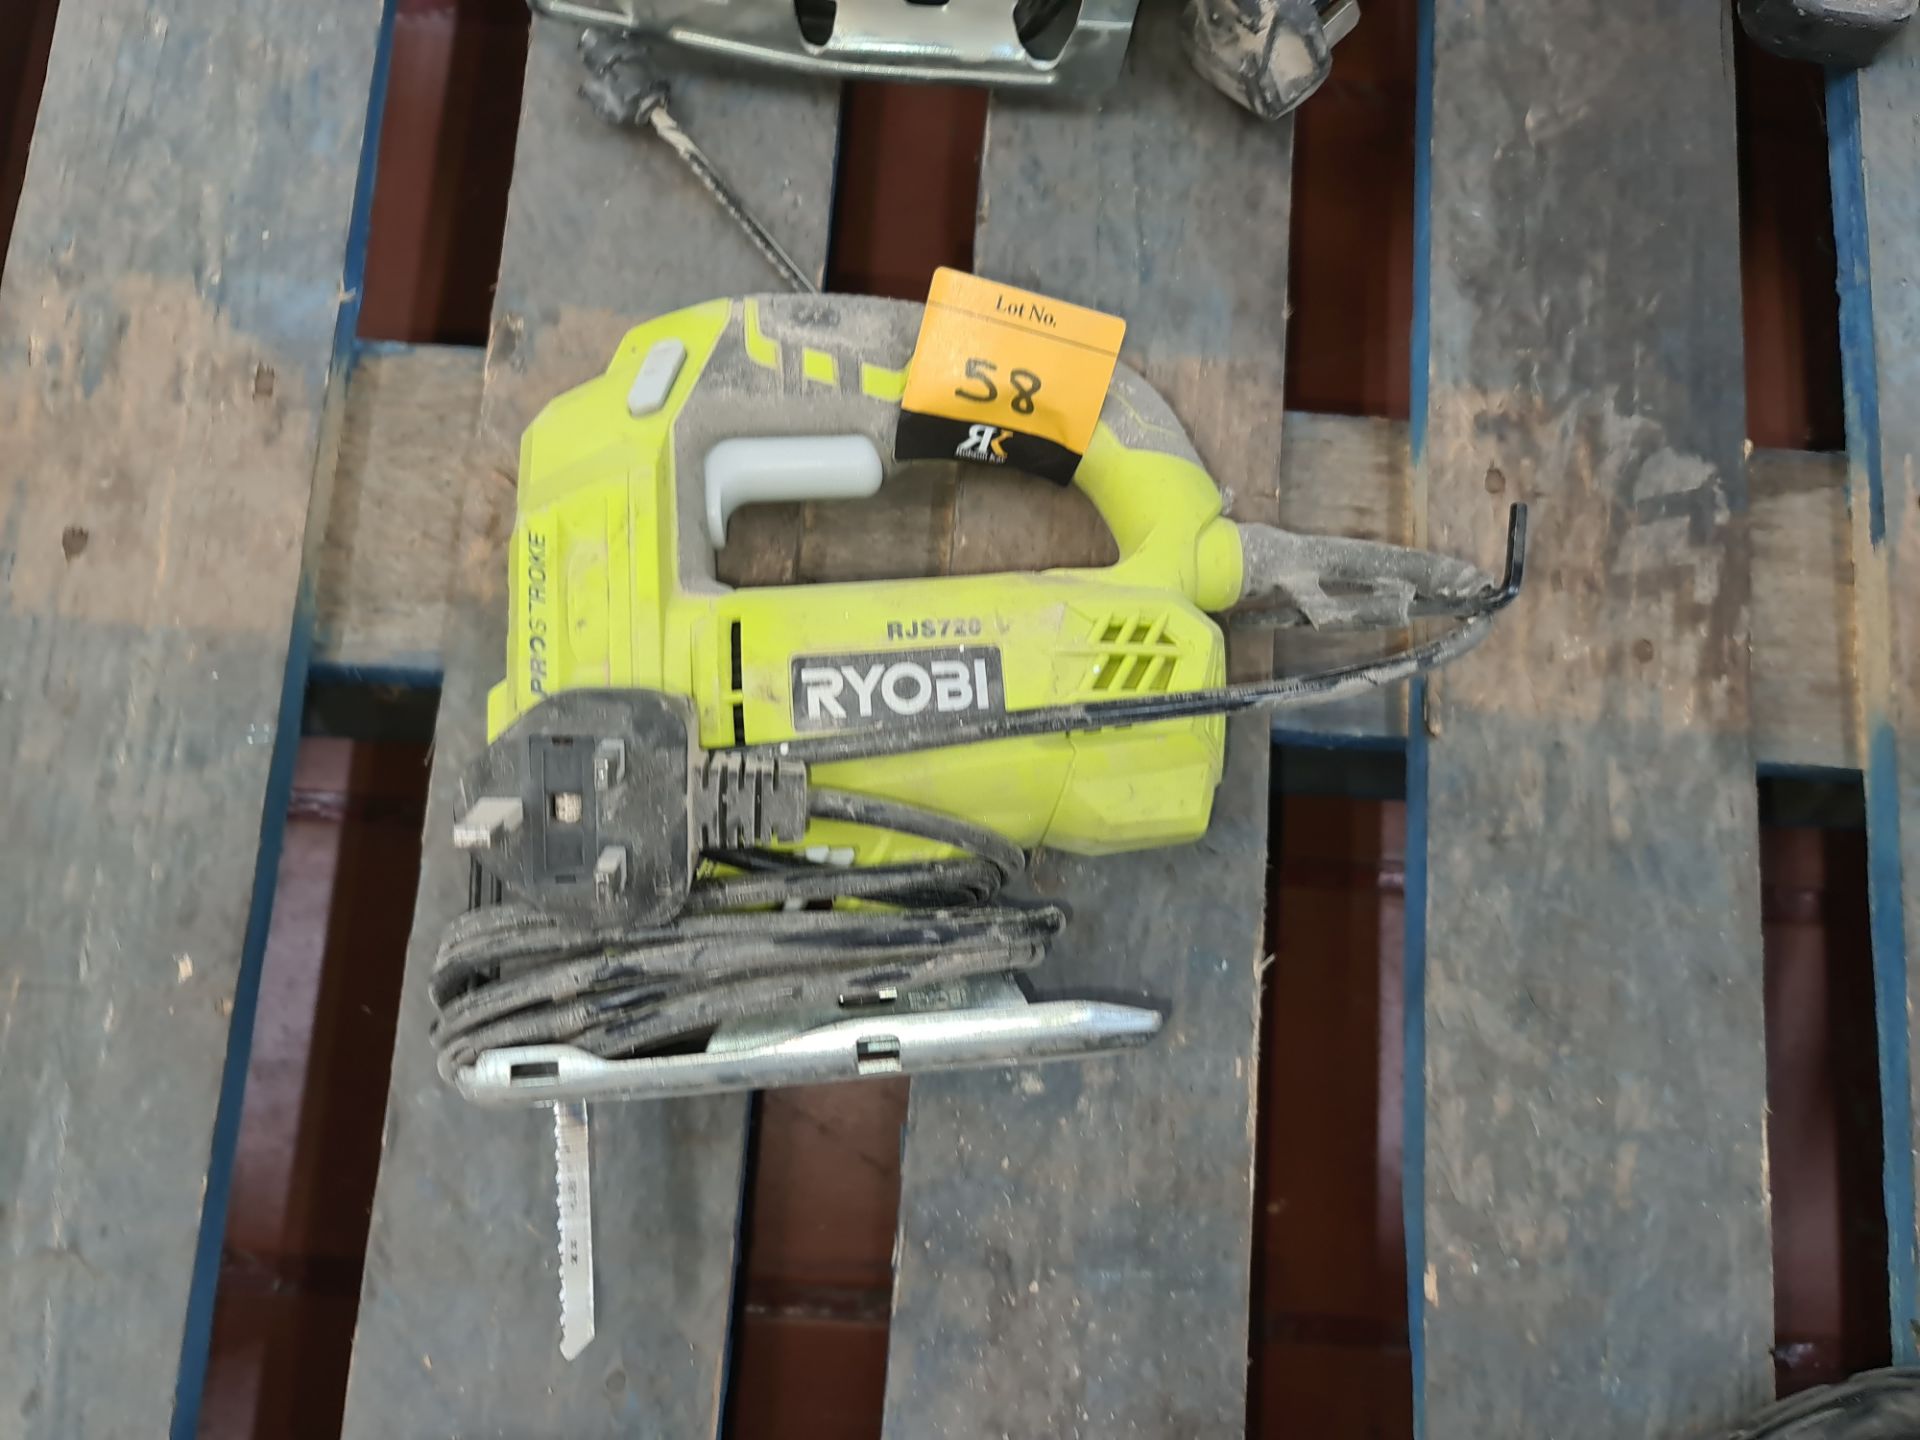 Ryobi model RJS720 electric jig saw plus second Ryobi jig saw which appears possibly incomplete - Image 3 of 5